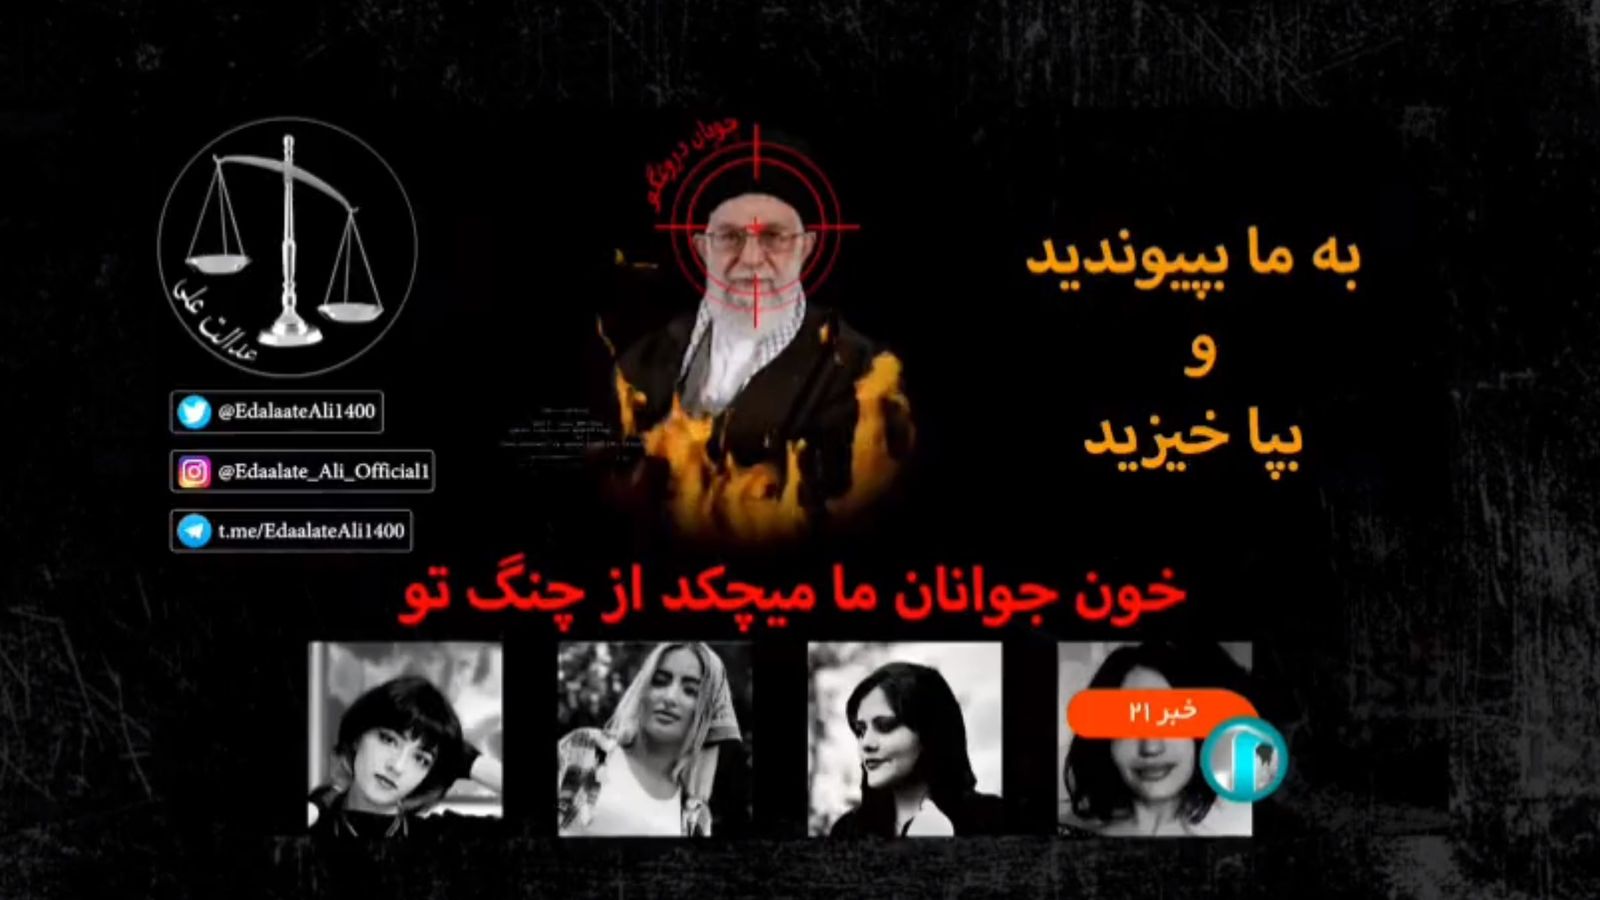 Iranian state TV hacked as women protesters tell President Raisi to 'get lost'